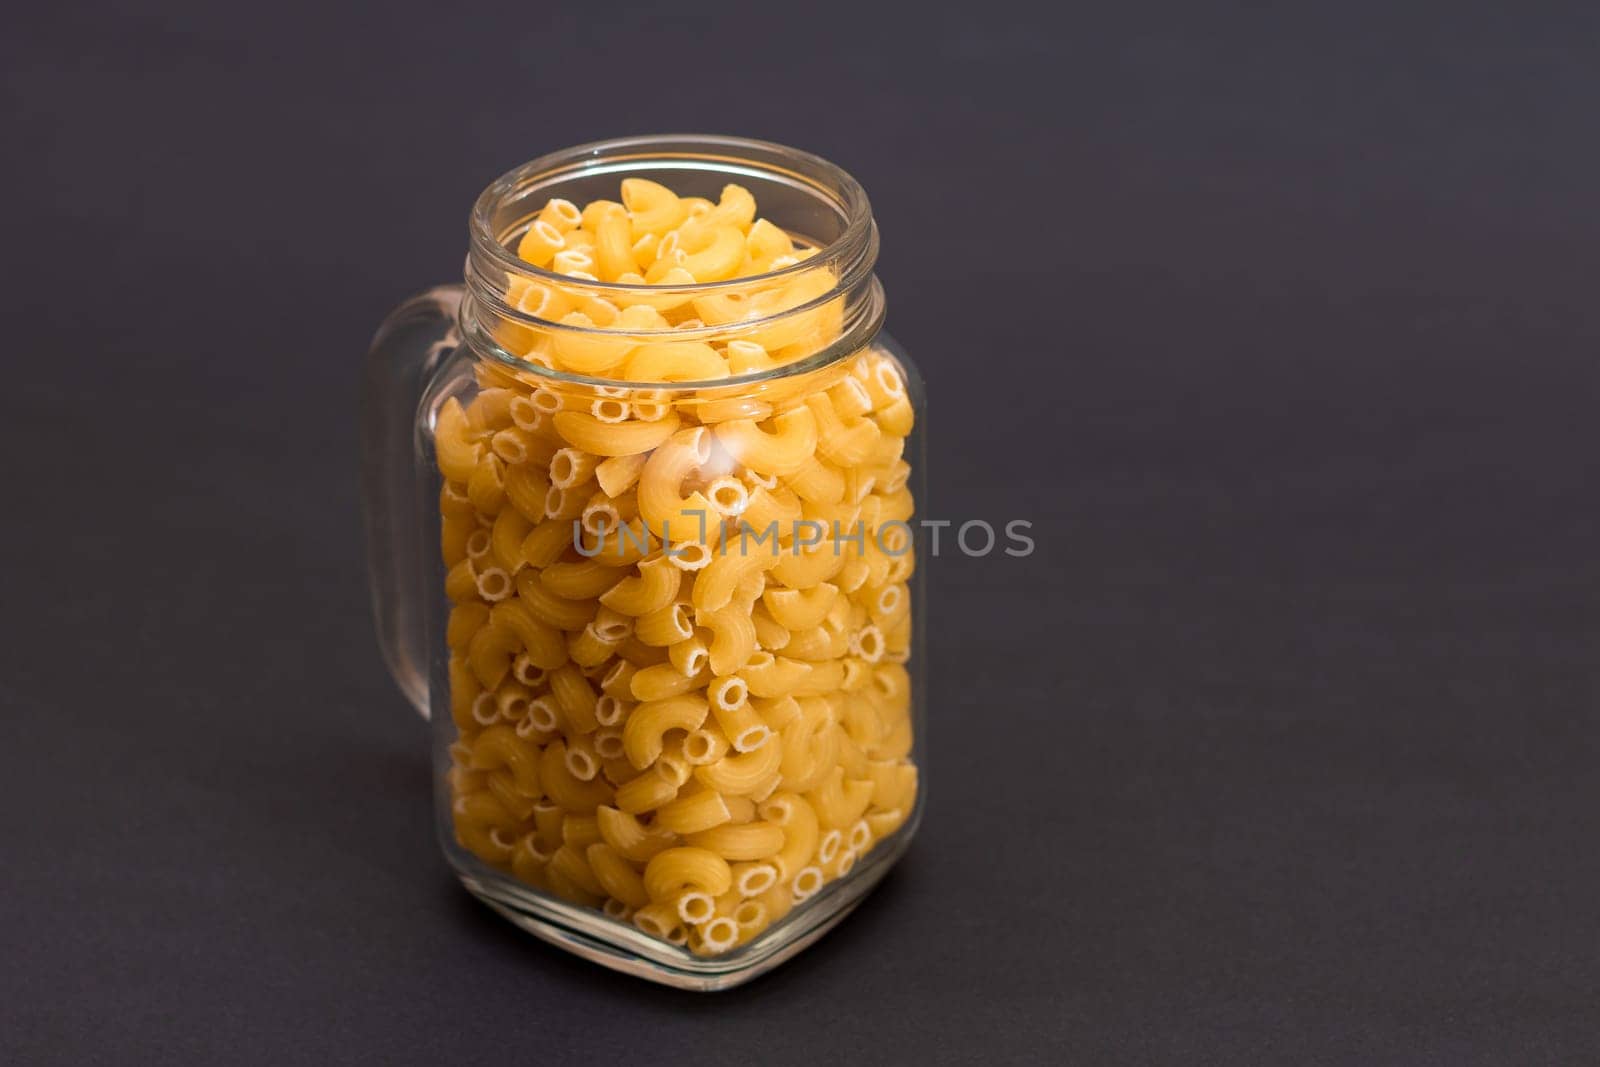 Uncooked Chifferi Rigati Pasta in Glass Jar on Black Background. Fat and Unhealthy Food. Classic Dry Macaroni. Italian Culture and Cuisine. Raw Pasta